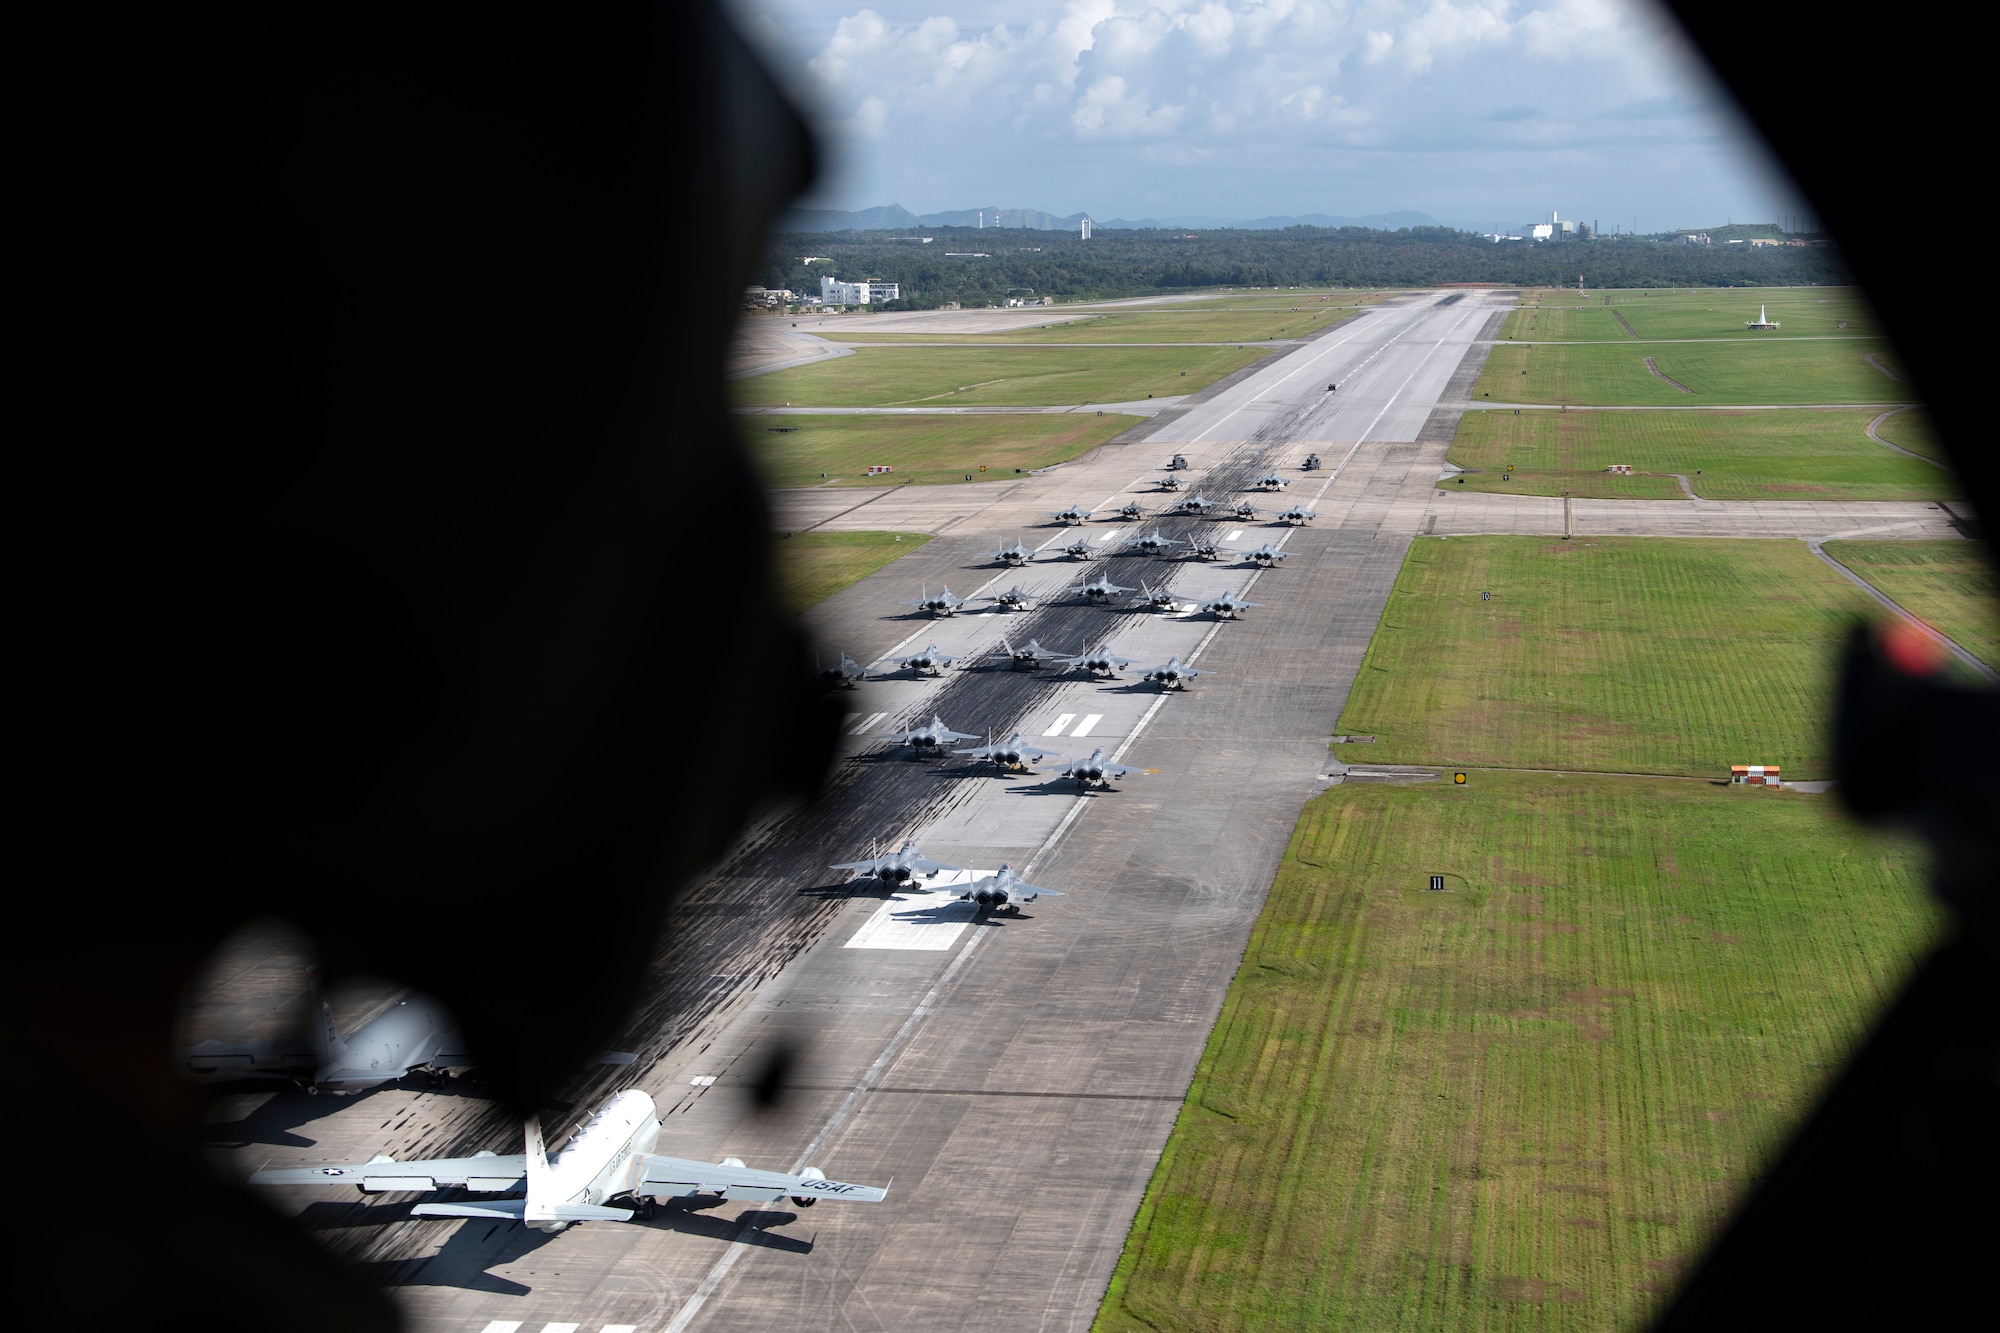 U.S. Air Force aircraft line up on the runway for a capabilities demonstration at Kadena Air Base, Japan, Nov. 22, 2022. The demo included HH-60G Pave Hawks, F-15C Eagles, F-22A Raptors, a KC-135 Stratotanker, an E-3 Sentry and an RC-135 Rivet Joint. (U.S. Air Force photo by Senior Airman Jessi Roth)